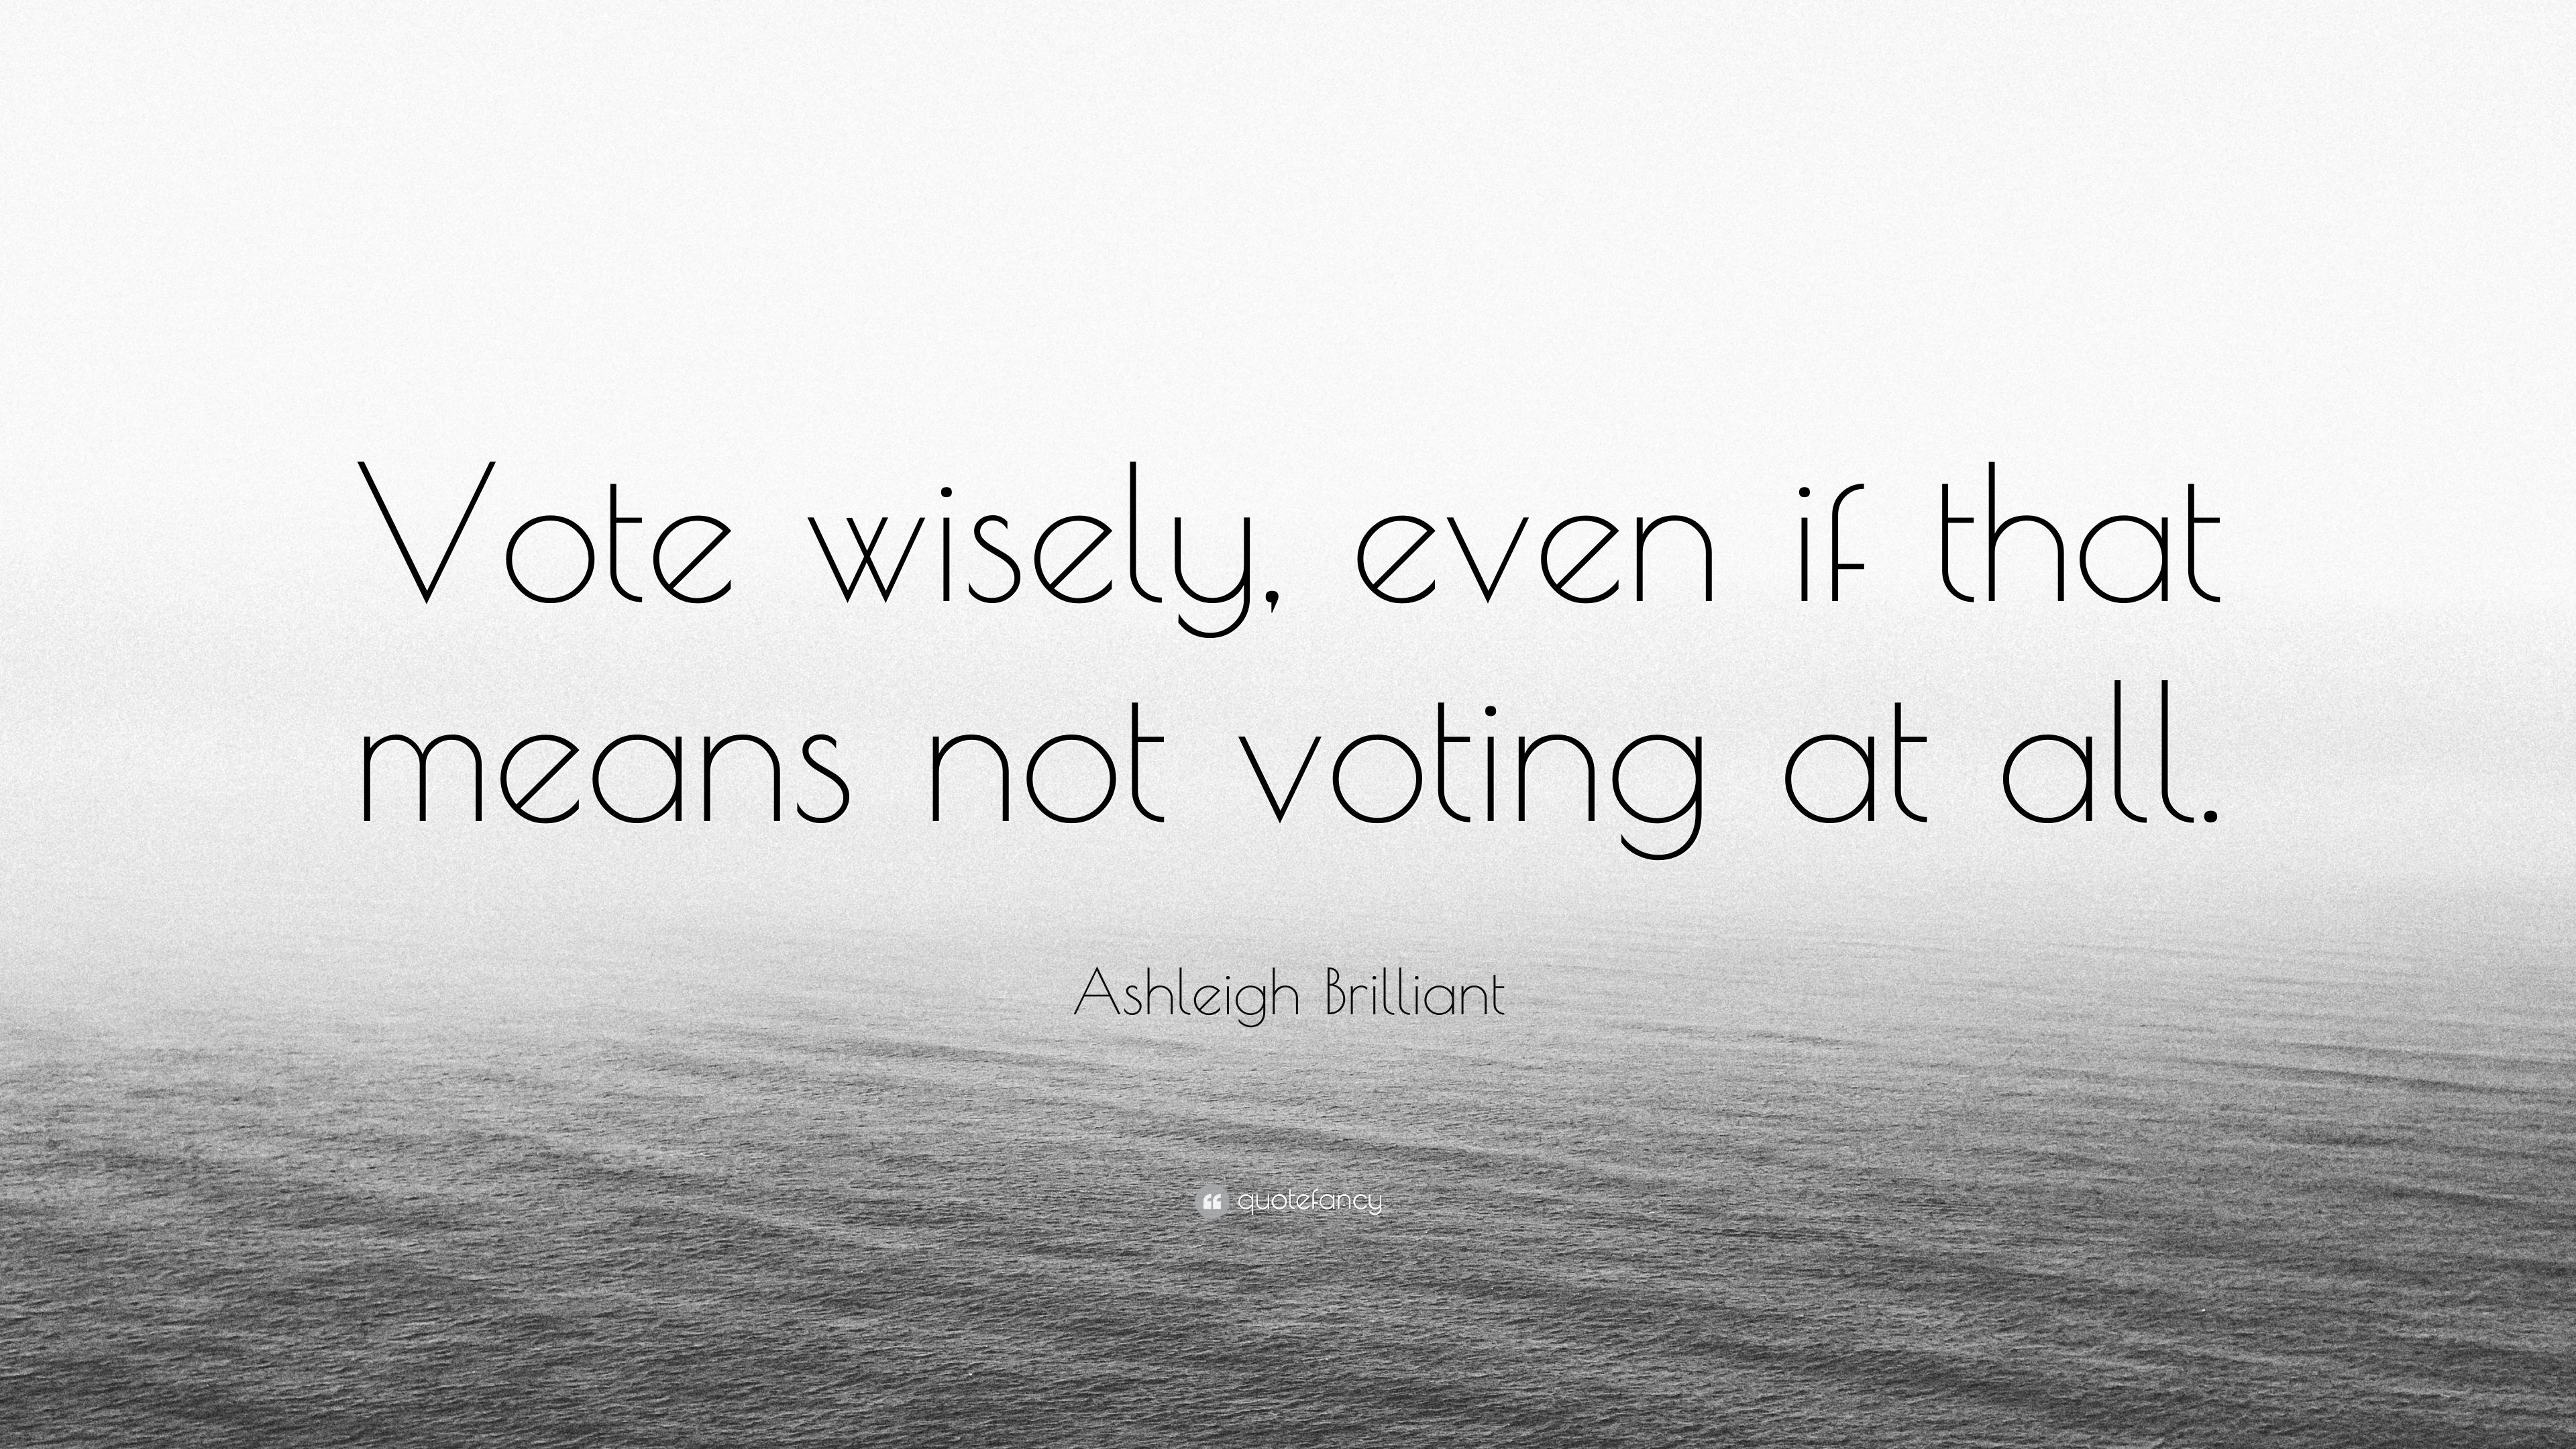 Ashleigh Brilliant Quote: “Vote wisely, even if that means not voting at all.” (11 wallpaper)